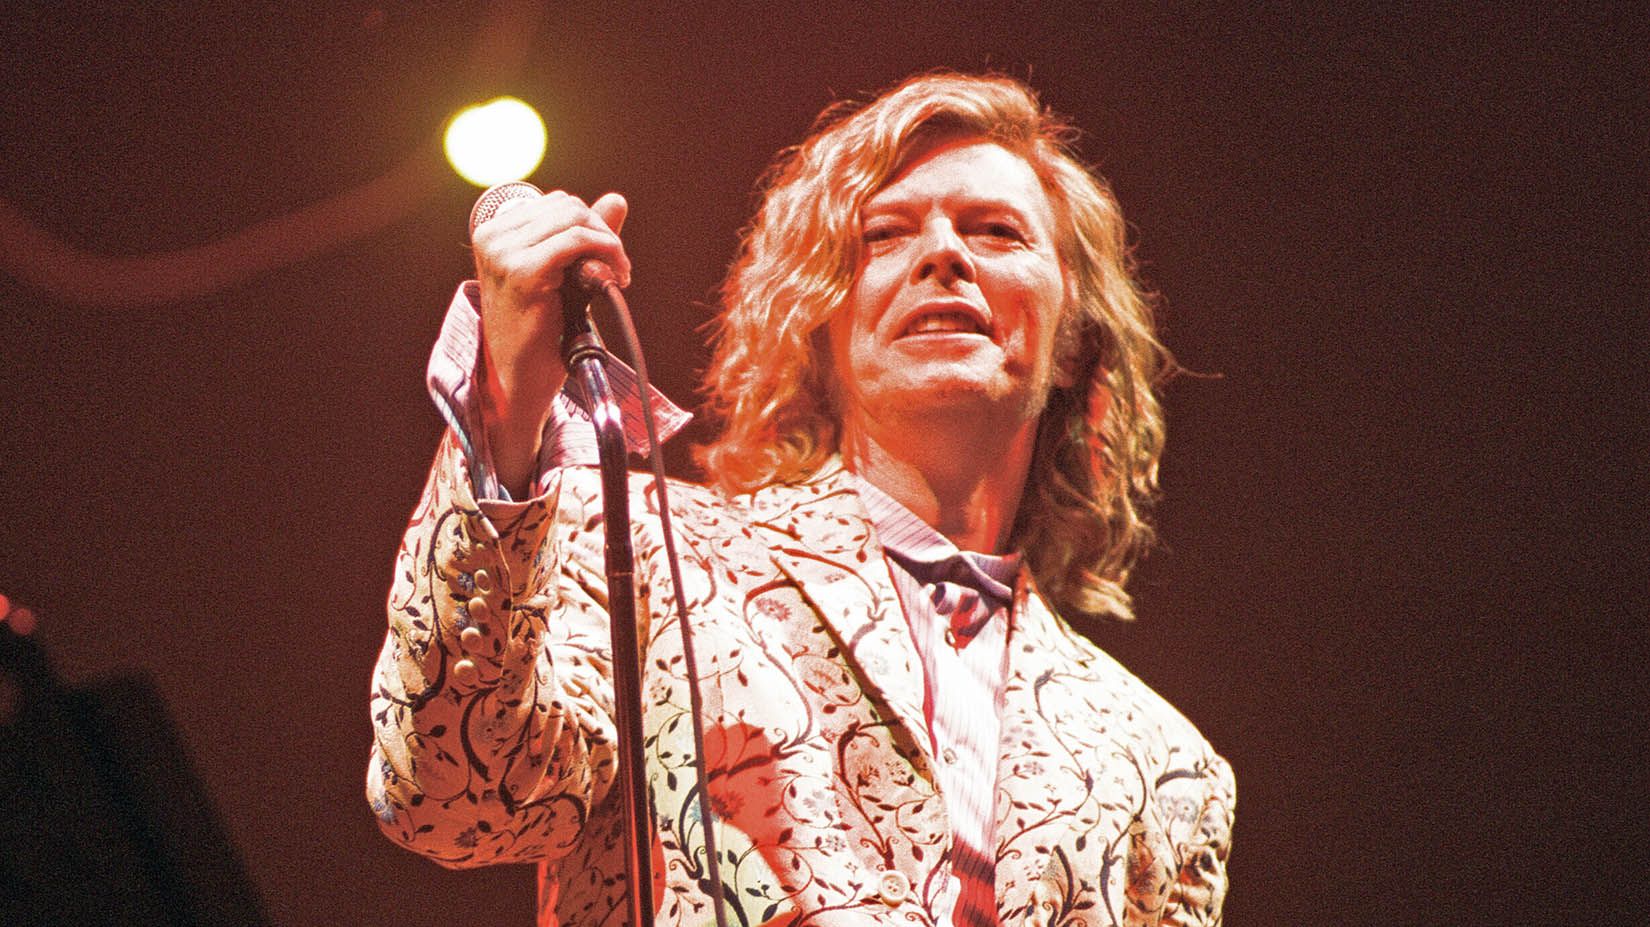 David Bowie film set for first UK release